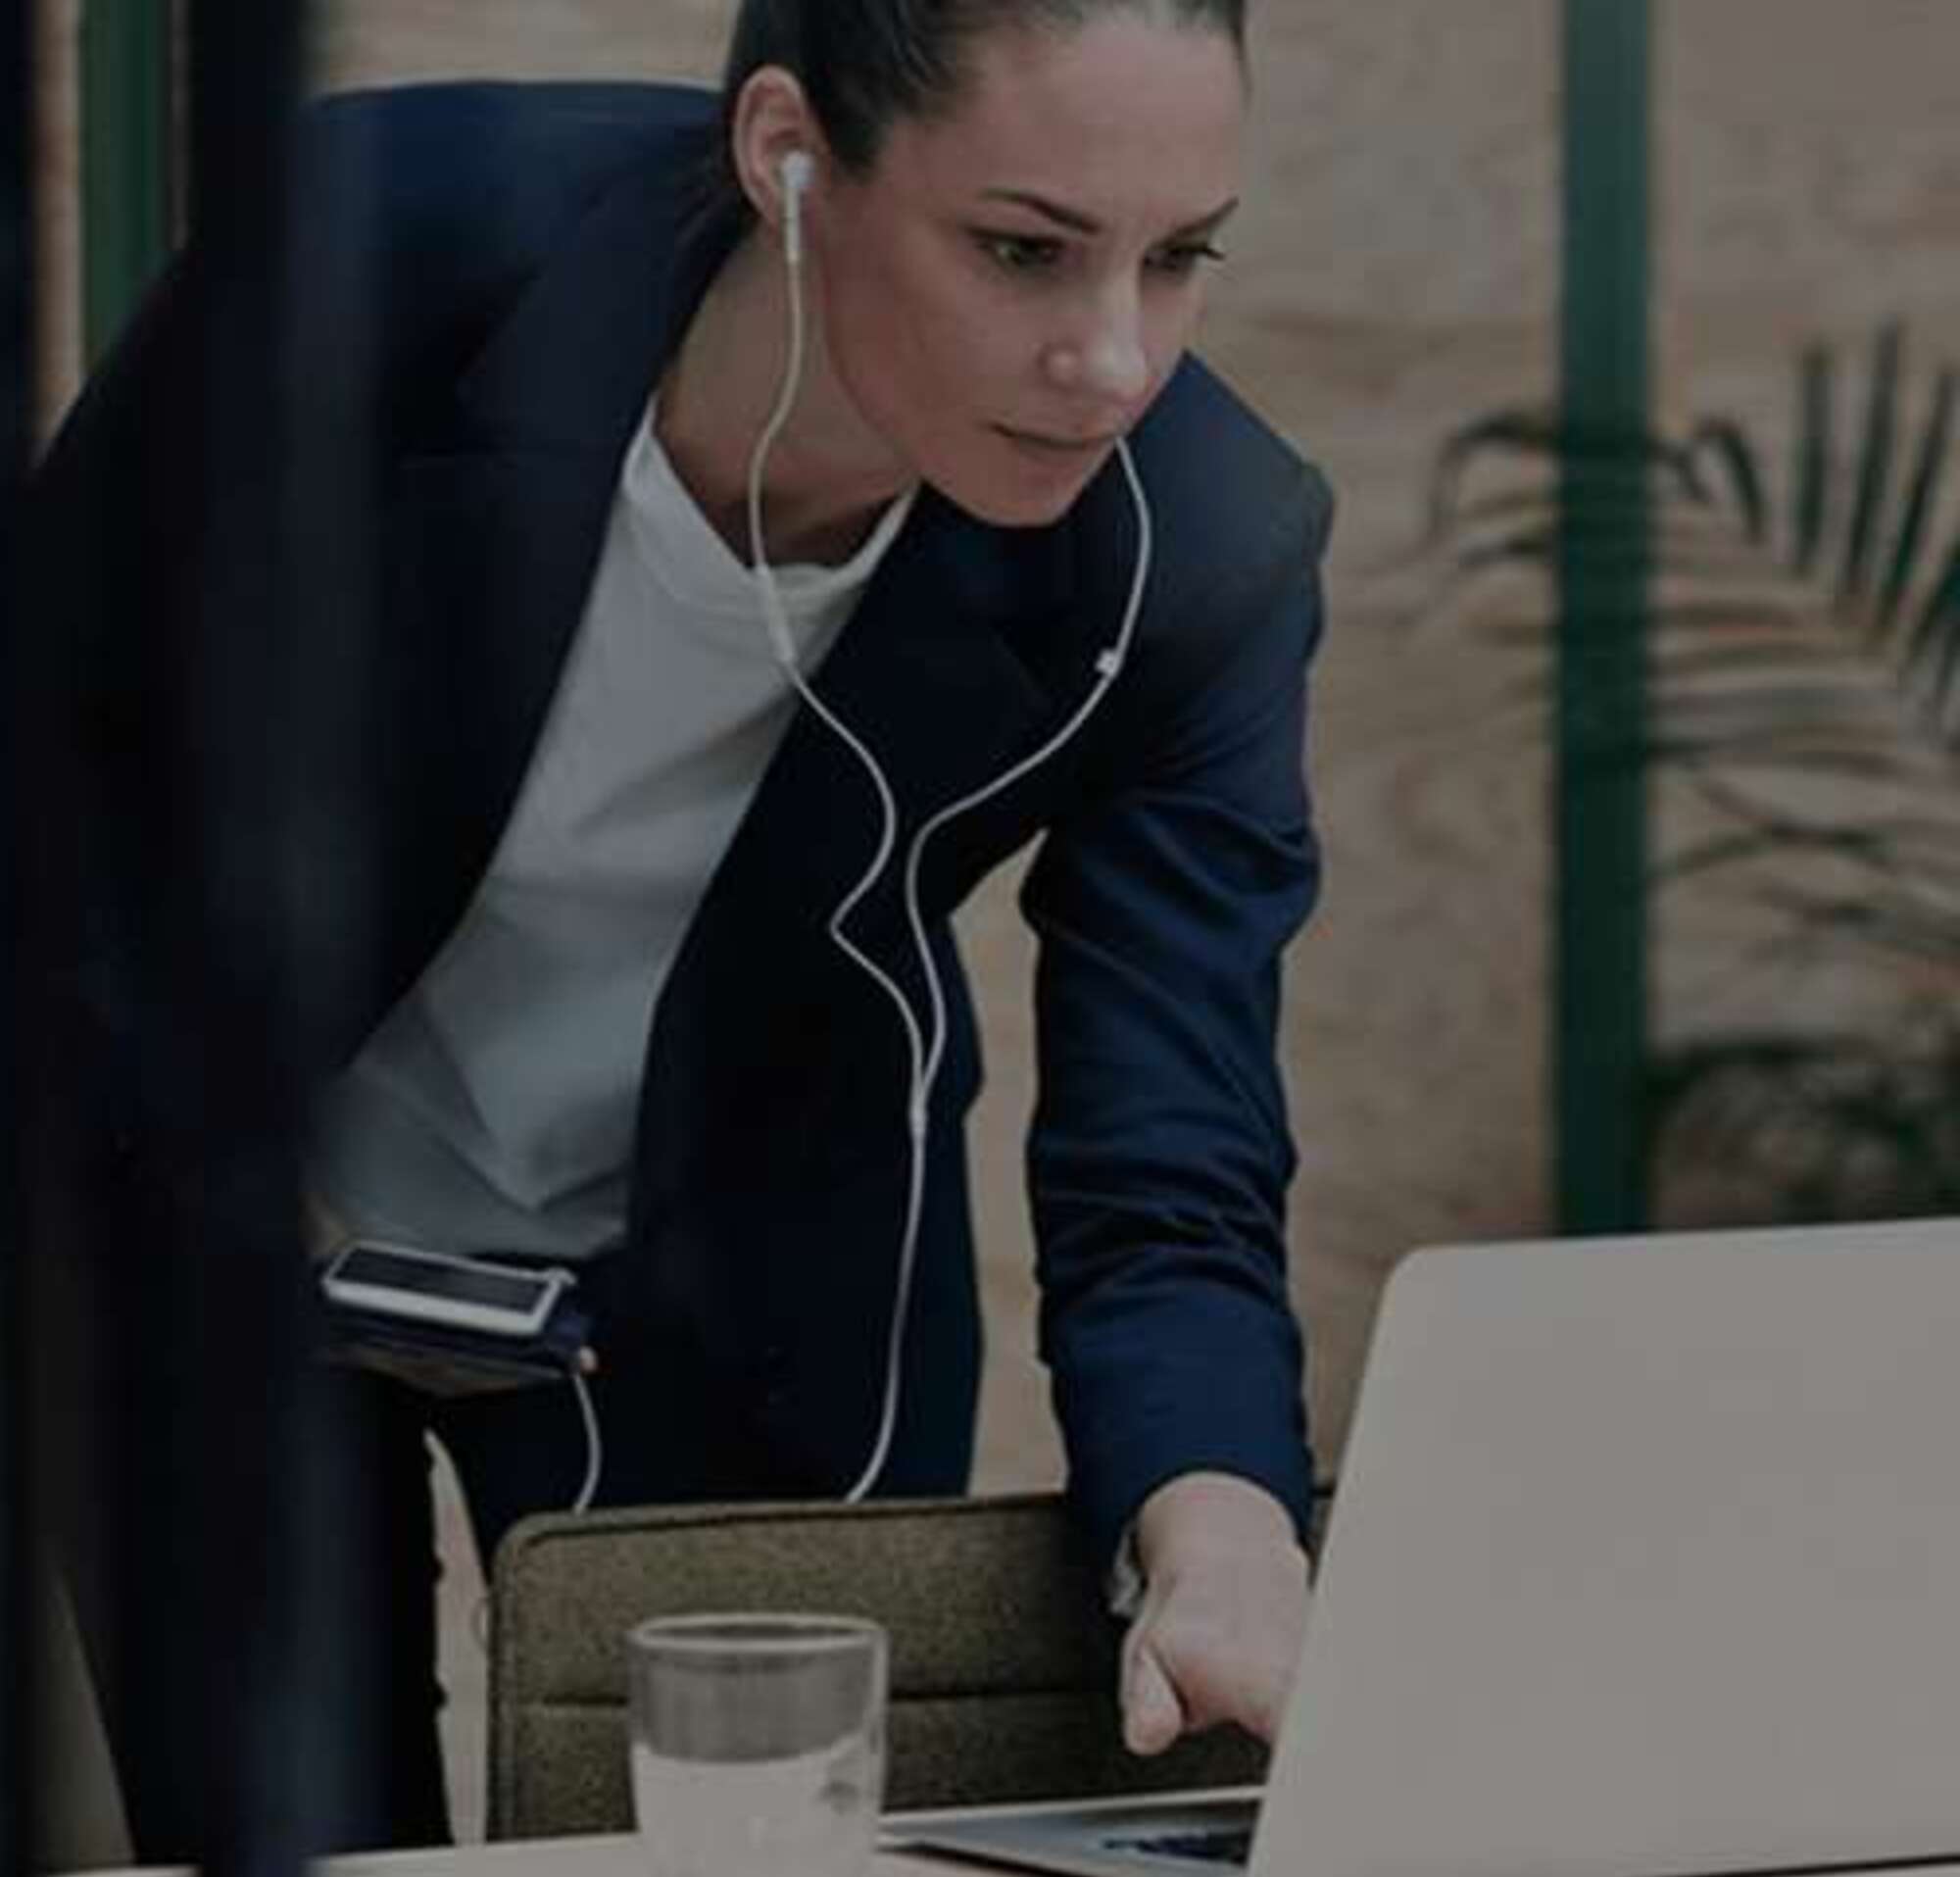 Woman with earbuds working on a laptop and holding her phone.